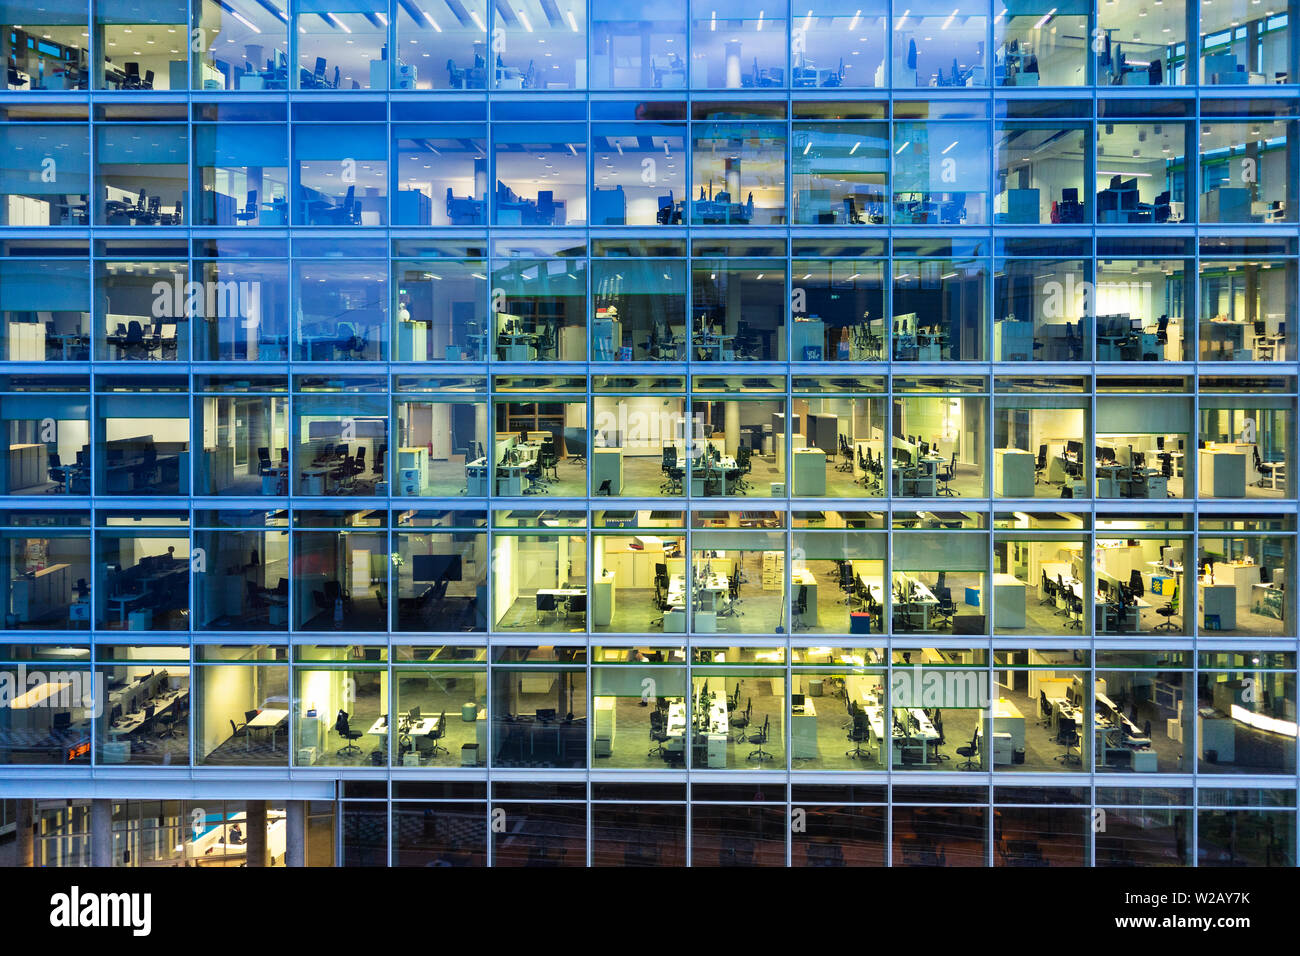 working late: looking through the glass facade at office spaces in a modern office building in the evening Stock Photo